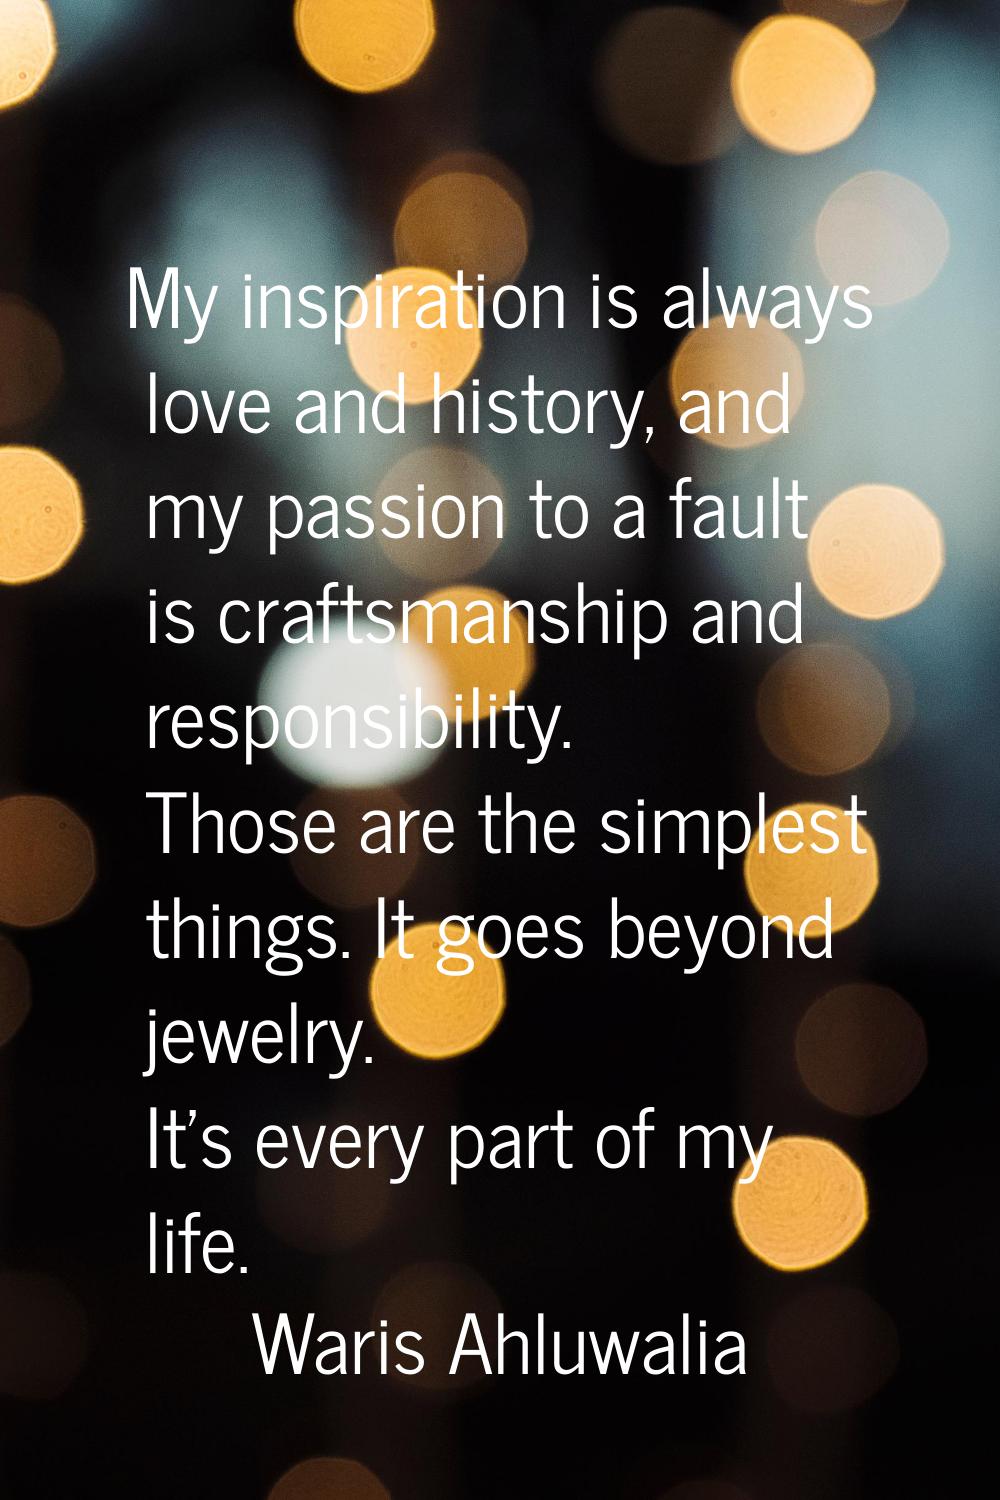 My inspiration is always love and history, and my passion to a fault is craftsmanship and responsib